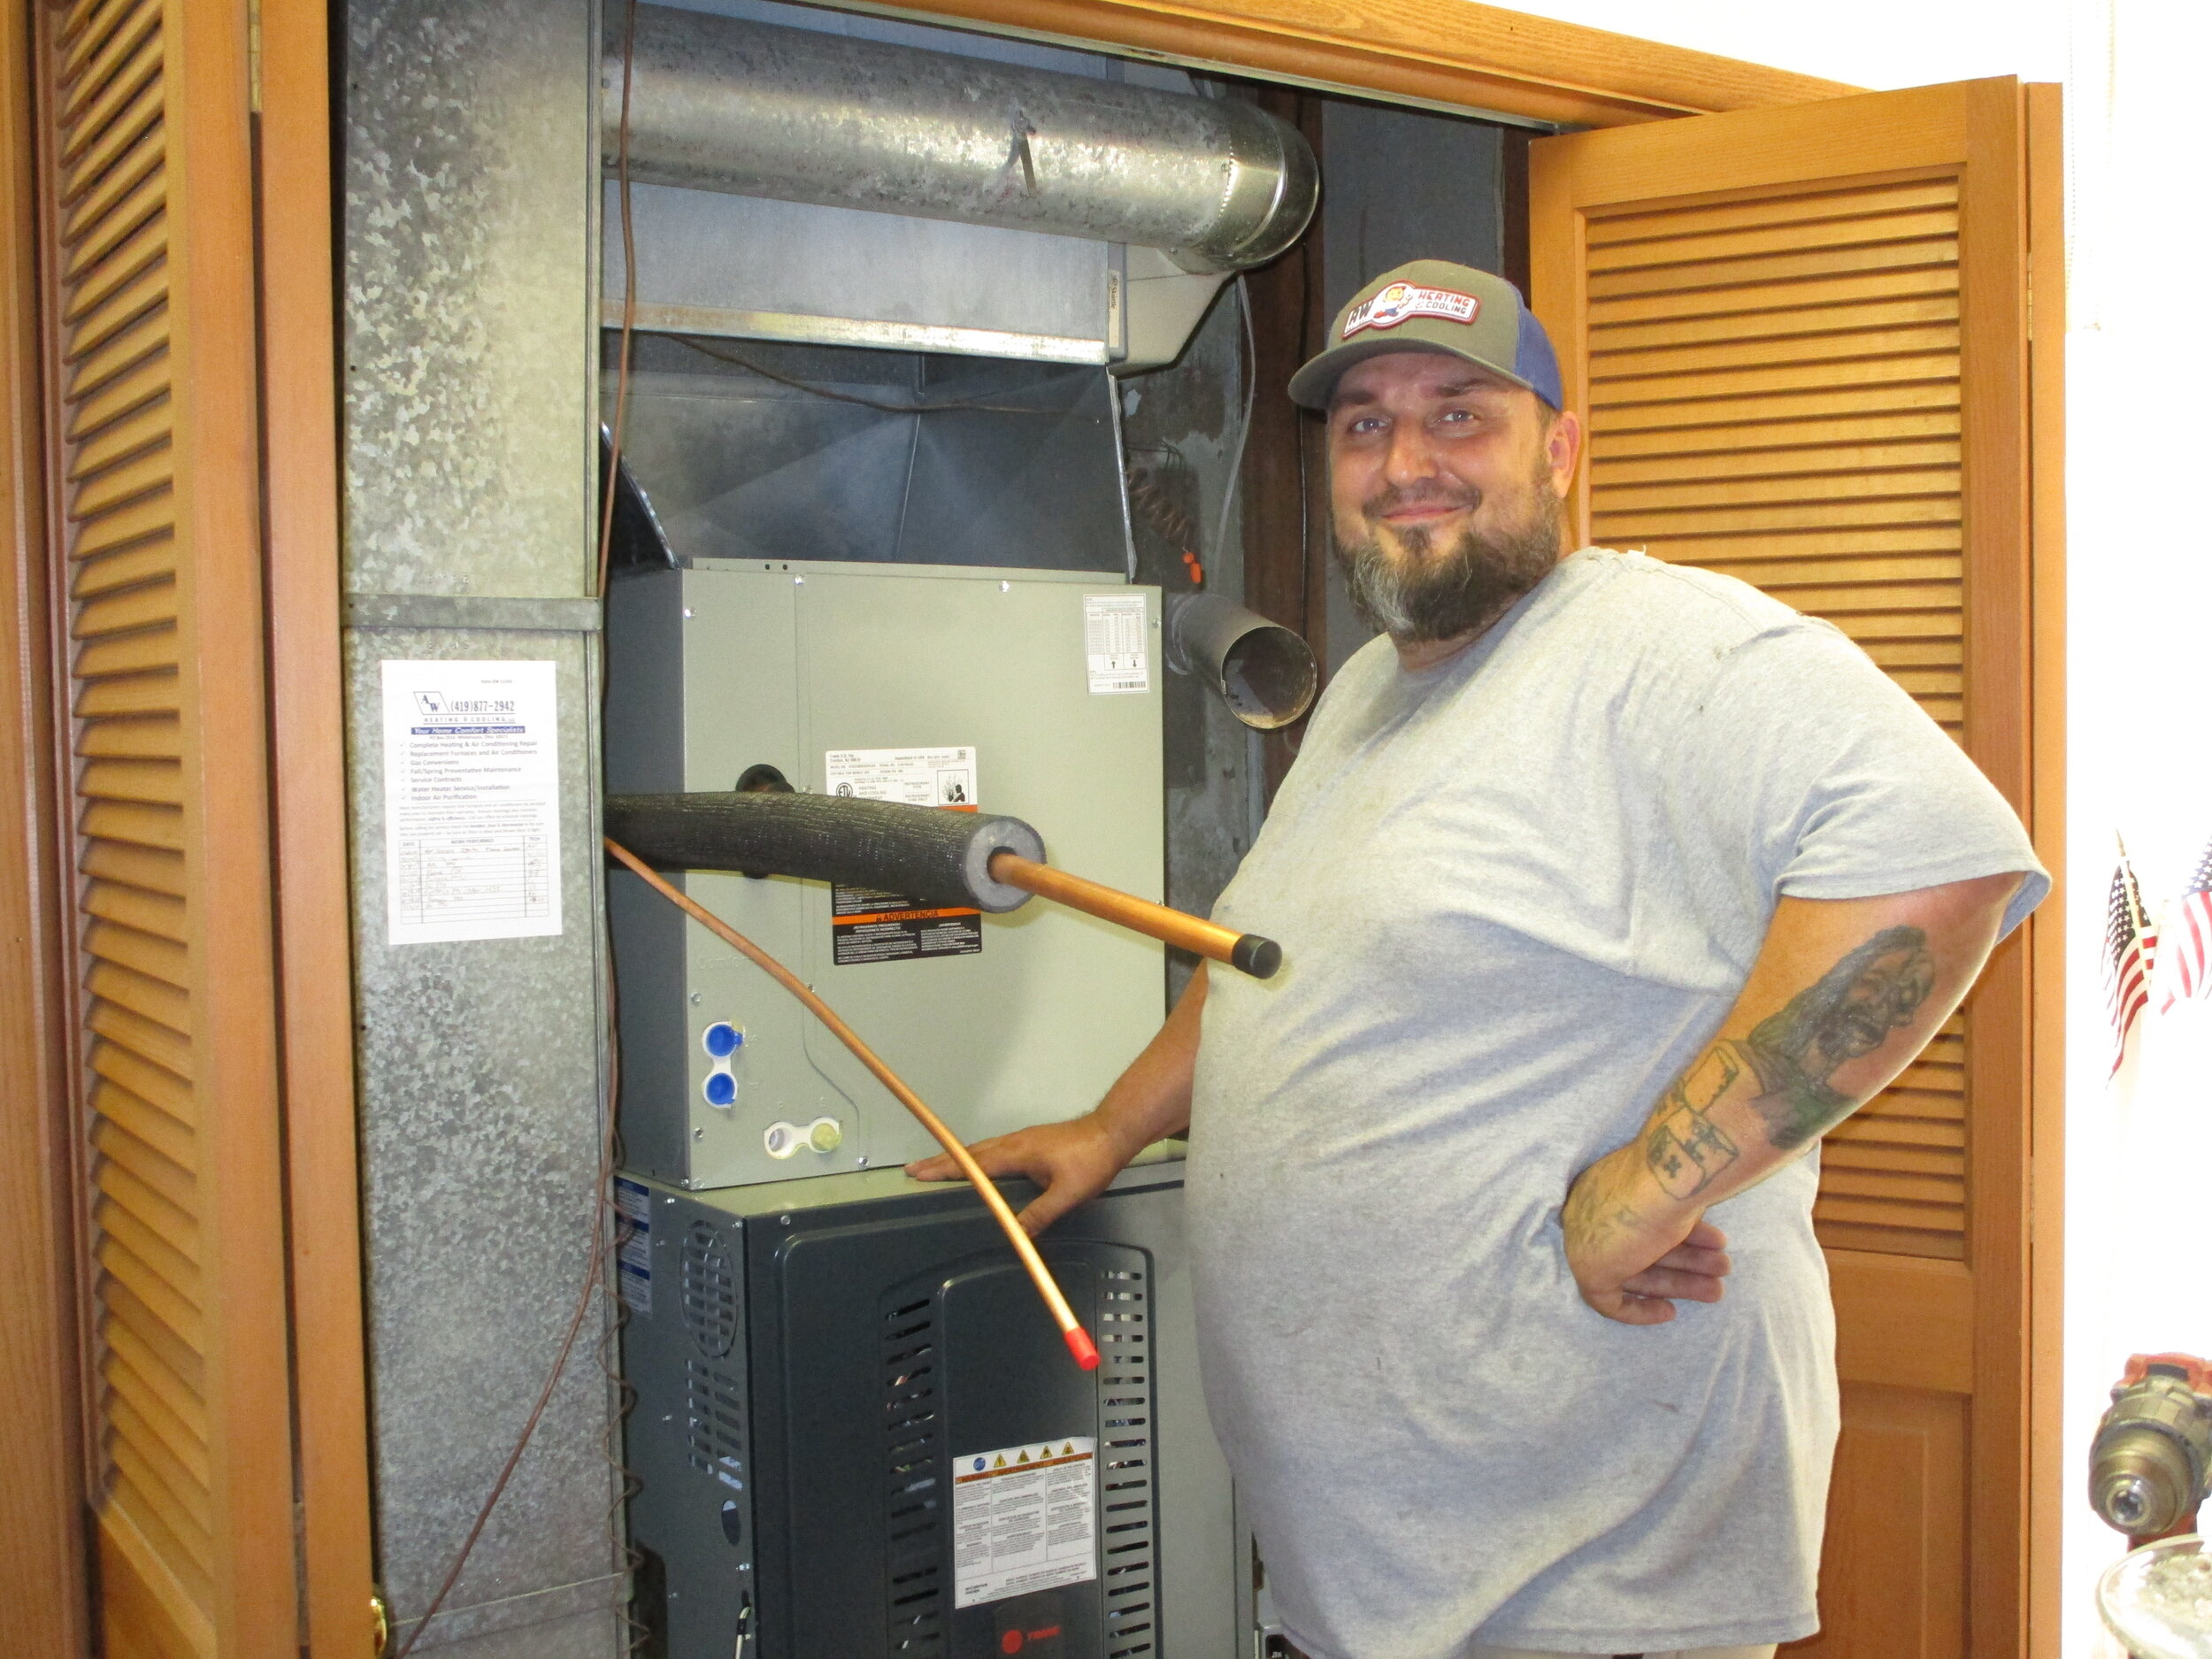 Jarid working on air conditioner  replacement 9-16-2021.JPG